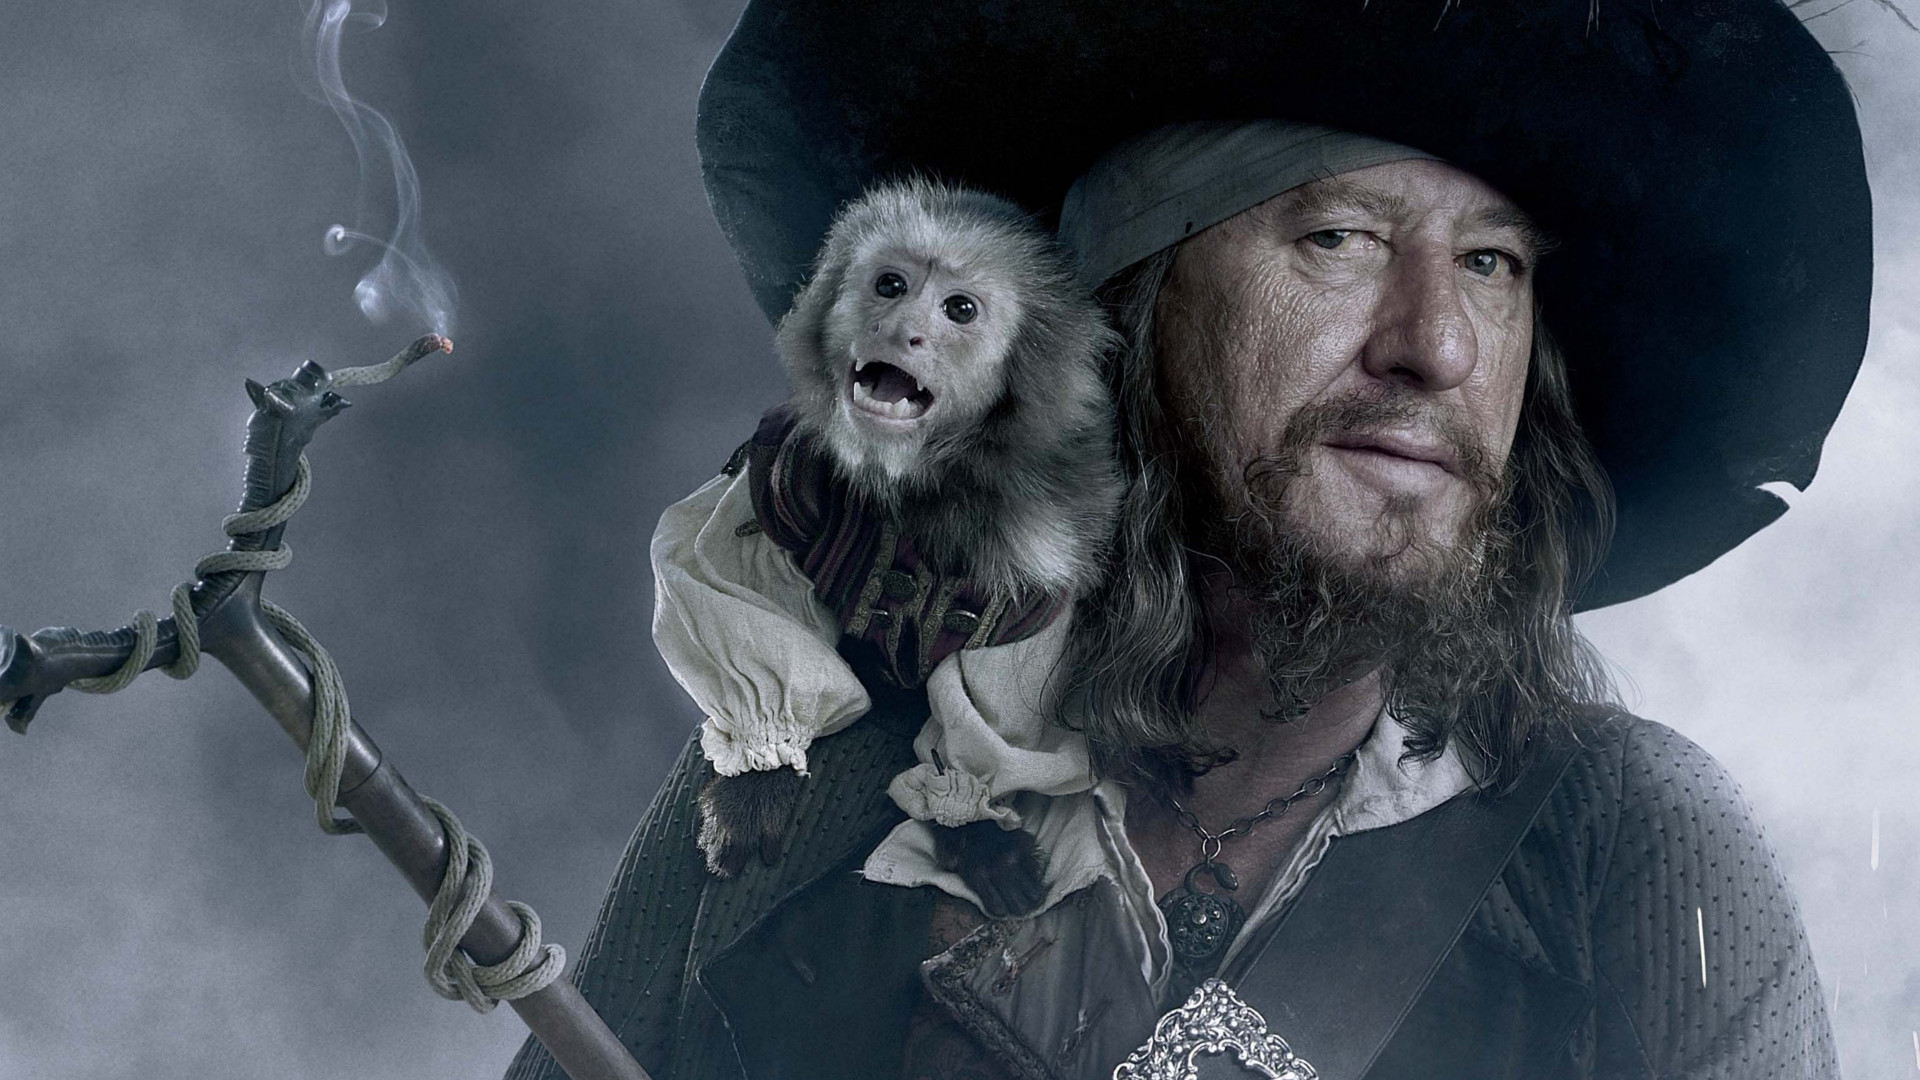 pirates of the caribbean, movie, pirates of the caribbean: at world's end, geoffrey rush, hector barbossa